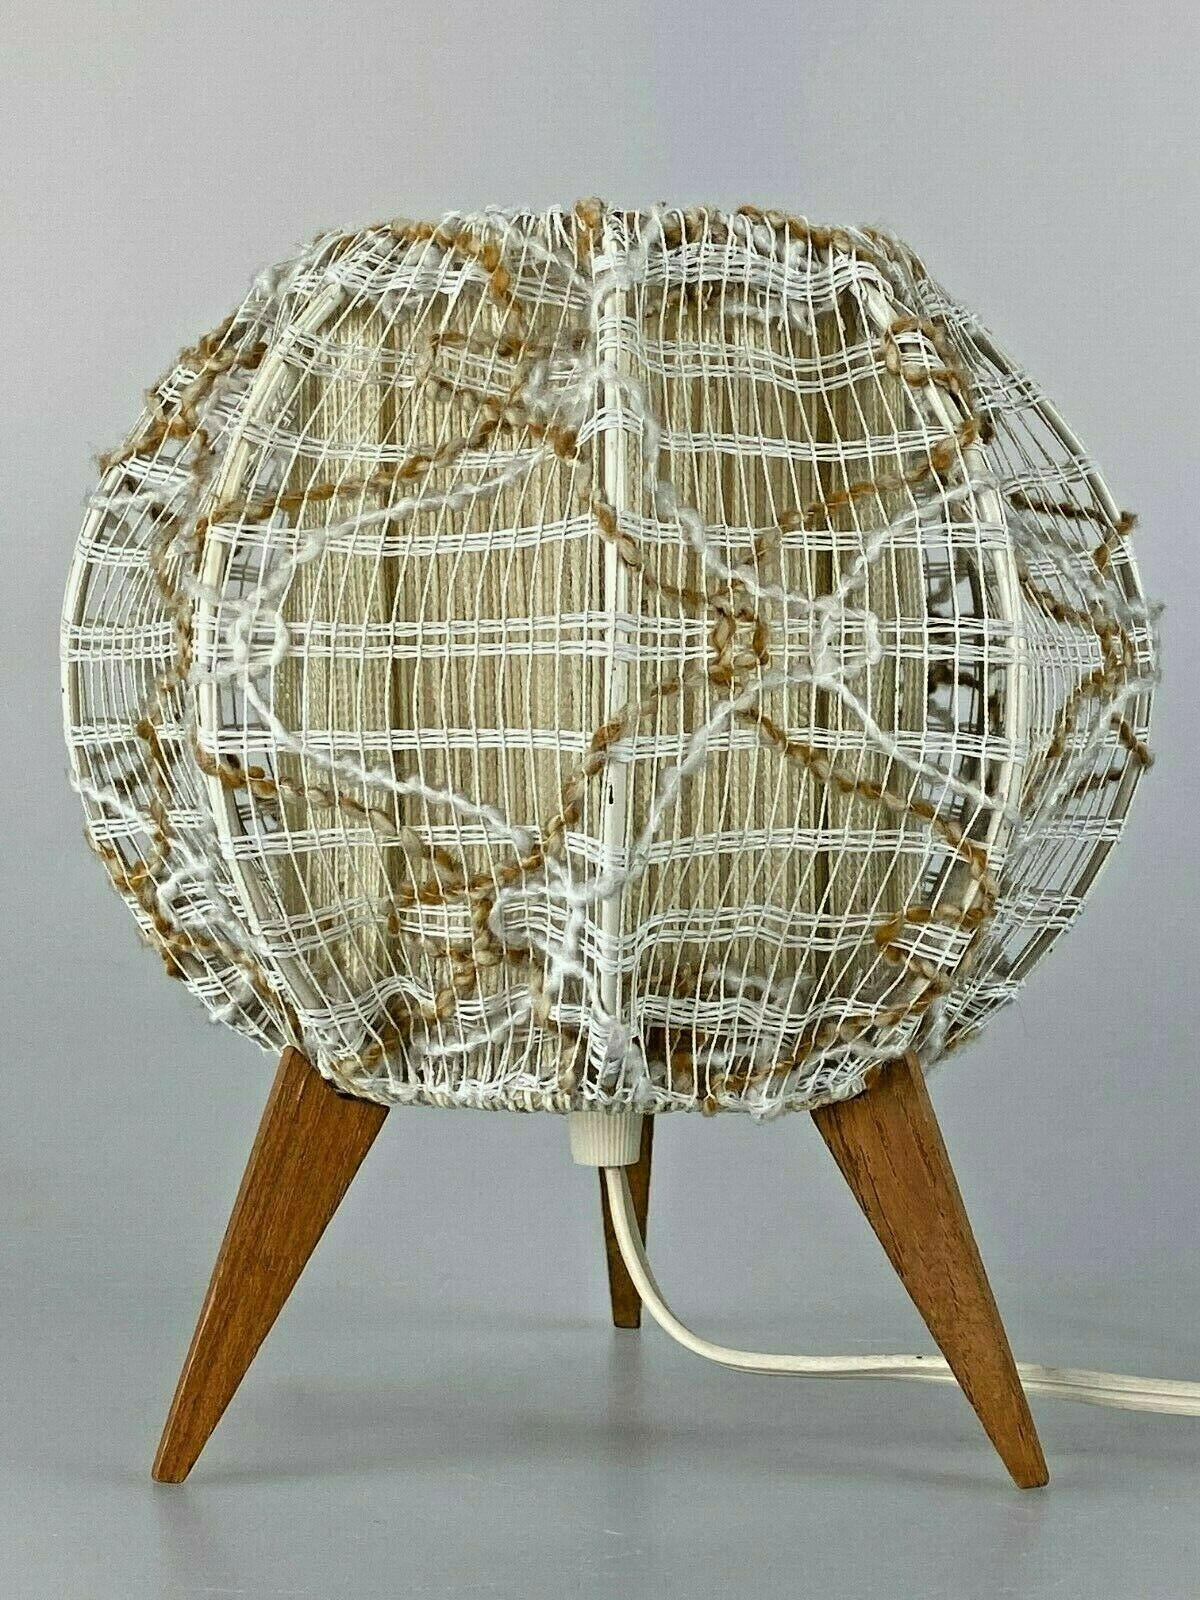 60s 70s ball lamp light table lamp bedside lamp space age design

Object: spherical lamp

Manufacturer:

Condition: good

Age: around 1960-1970

Dimensions:

Diameter = 17cm
Height = 19cm

Other notes:

The pictures serve as part of